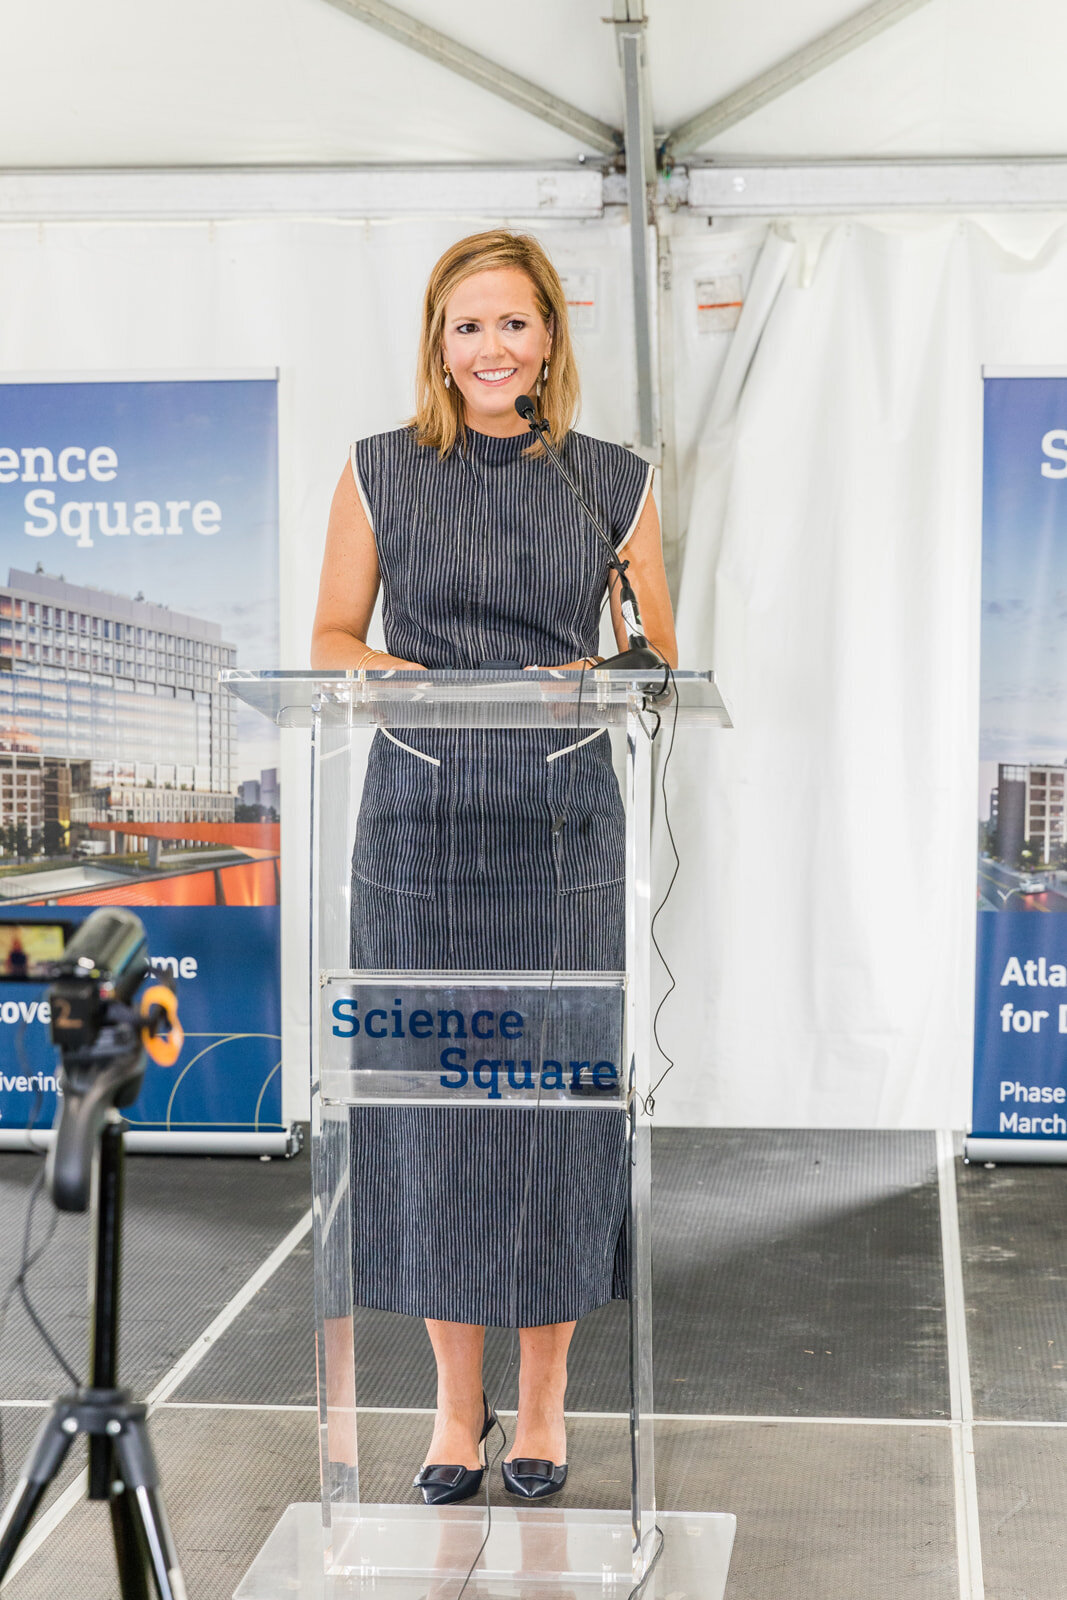 Speech during Georgia Tech Atlanta GA new building ground breaking event by photographer Laure Photography